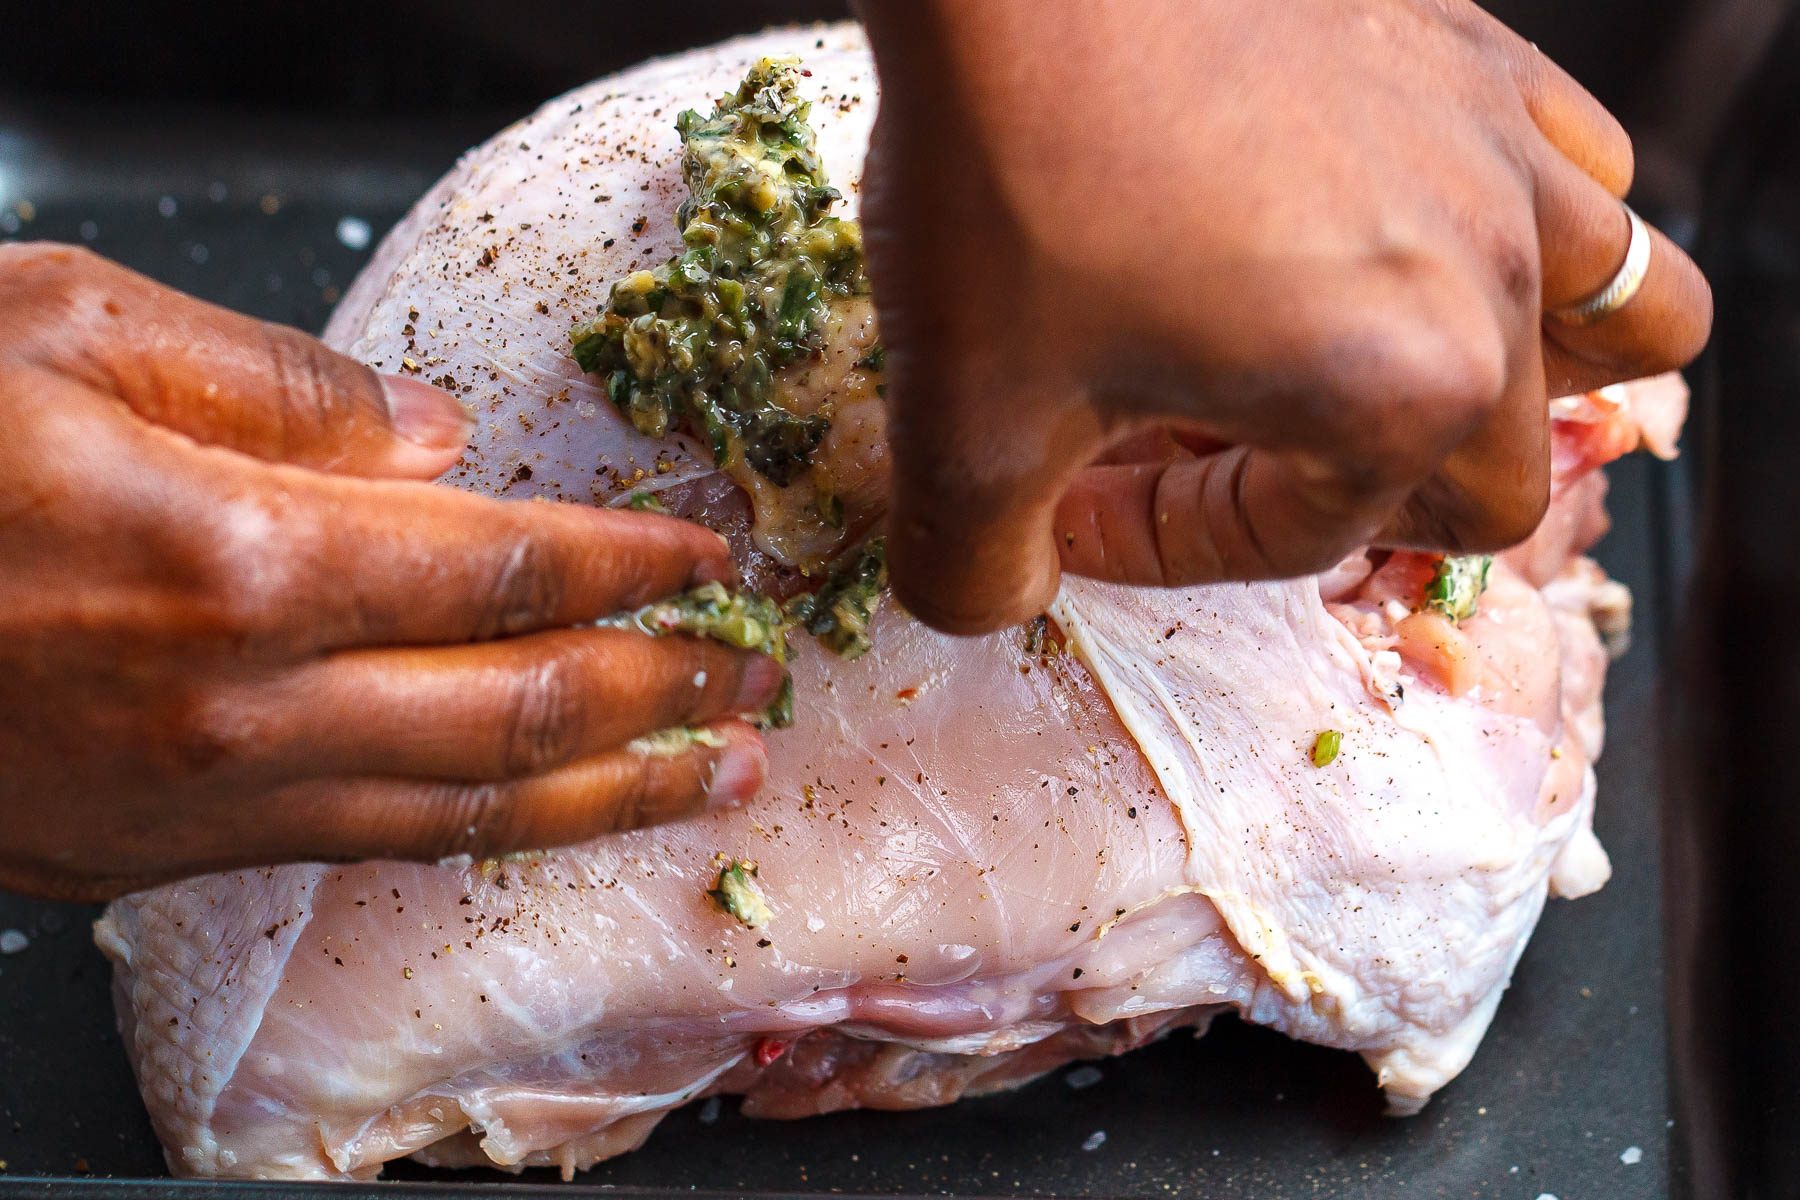 How to Stuff a Turkey breast With Herbed Butter - Here's how to make the juiciest, most tender, and most flavorful roasted turkey with herb butter you ever enjoyed!